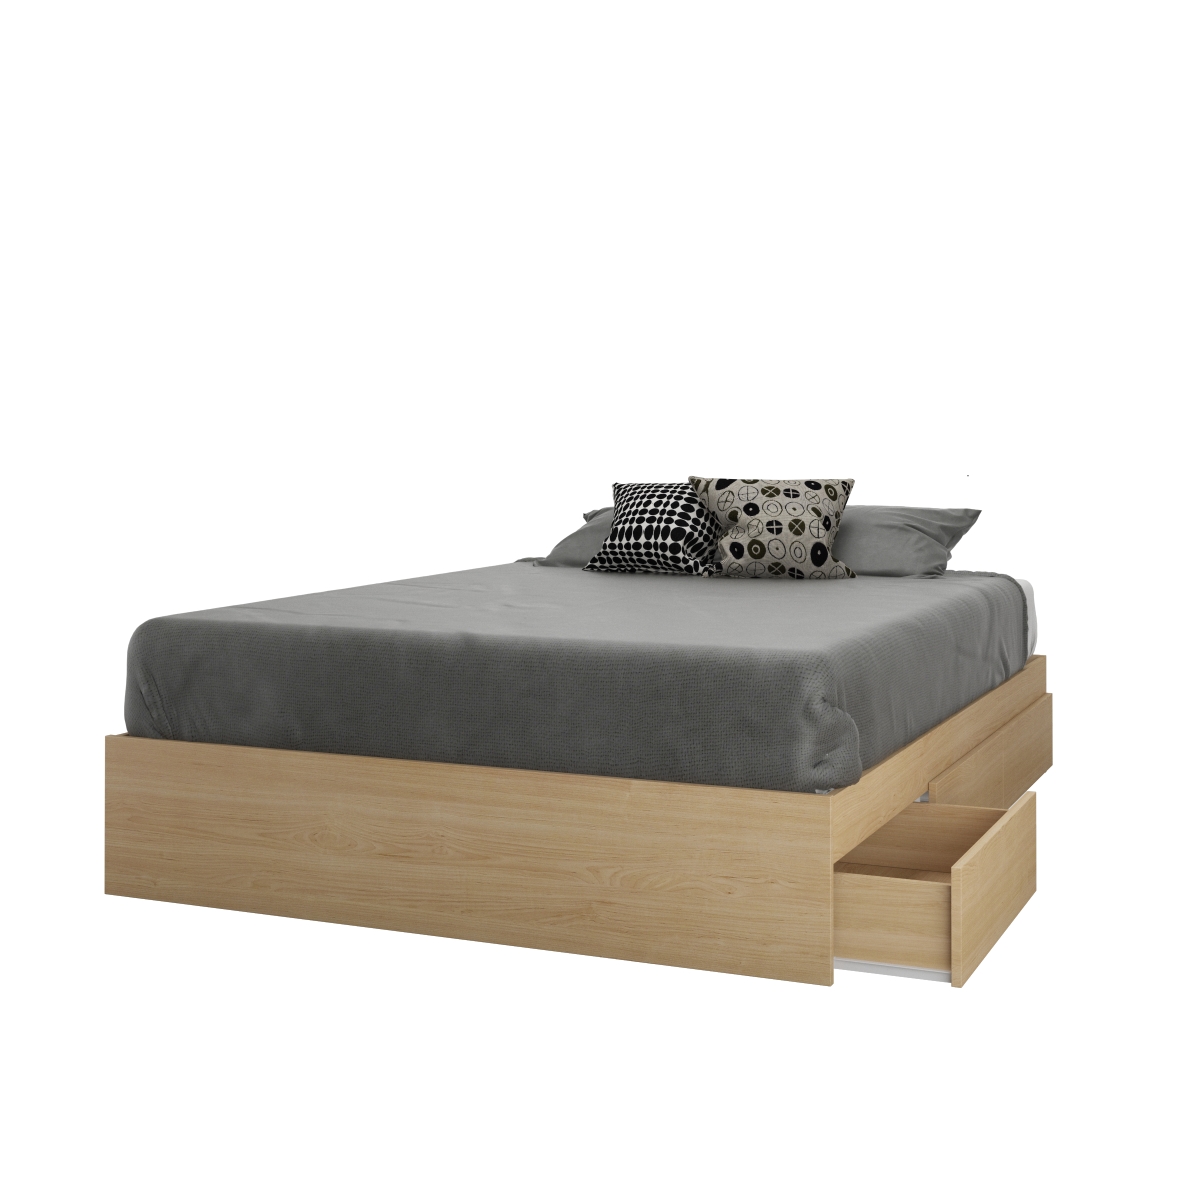 Nomad Complete Bed Kit, Natural Maple Laminate & White Matte Lacquer - Full Size